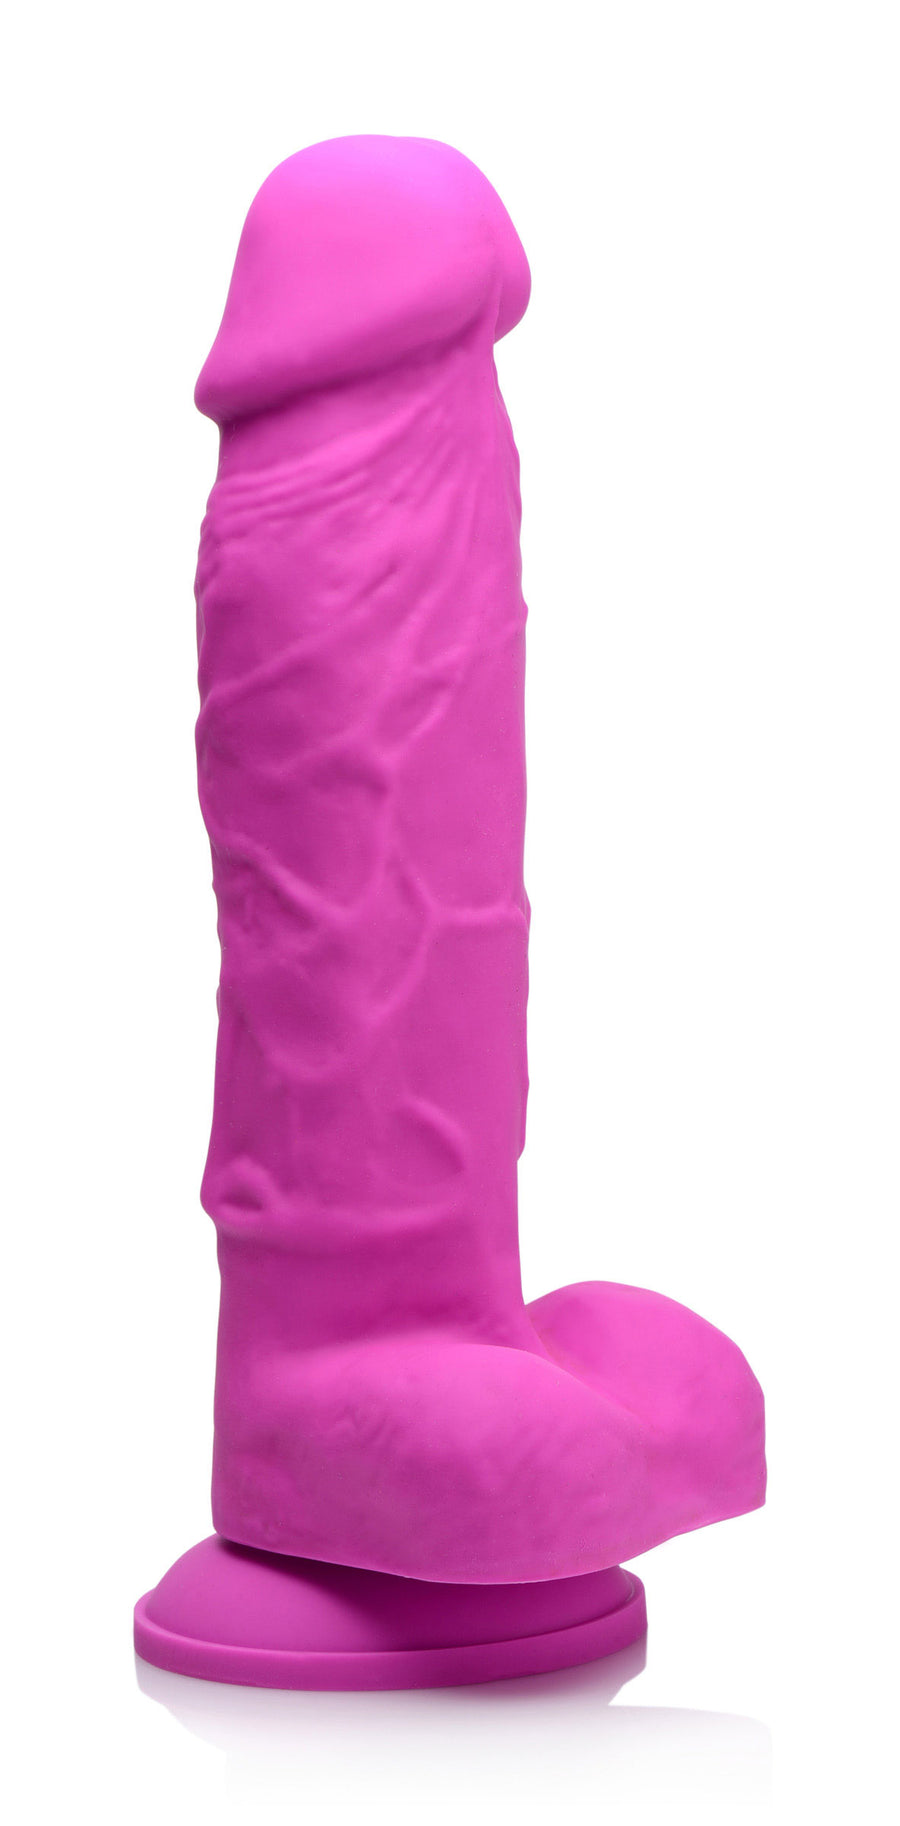 Power Pecker 7 Inch Silicone Dildo with Balls - Pink - AG371-Pink - UPC-848518036551